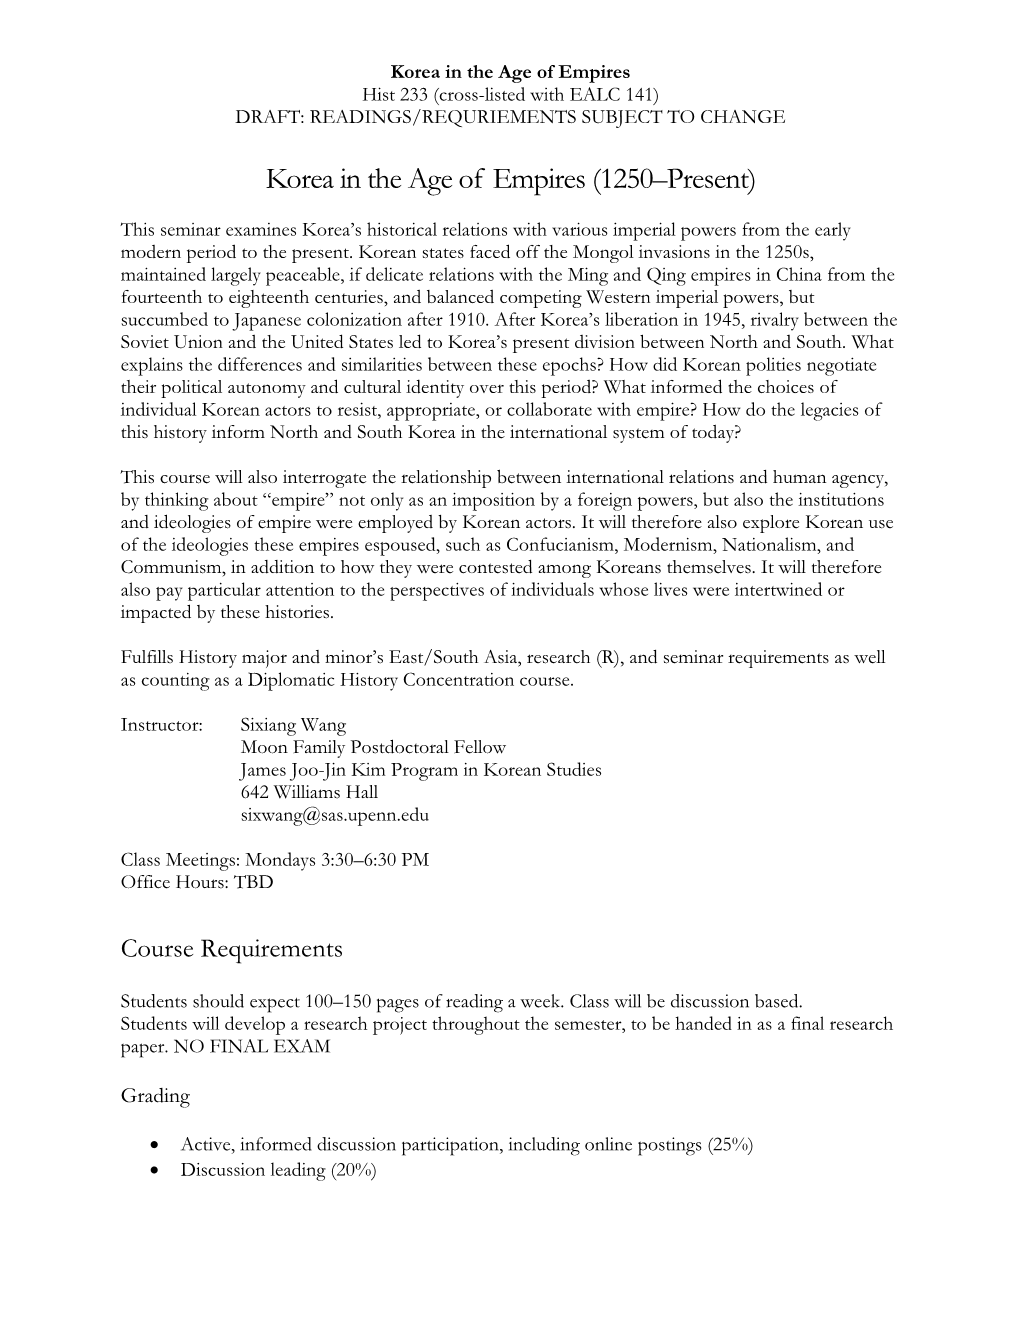 Korea in the Age of Empires Hist 233 (Cross-Listed with EALC 141) DRAFT: READINGS/REQURIEMENTS SUBJECT to CHANGE